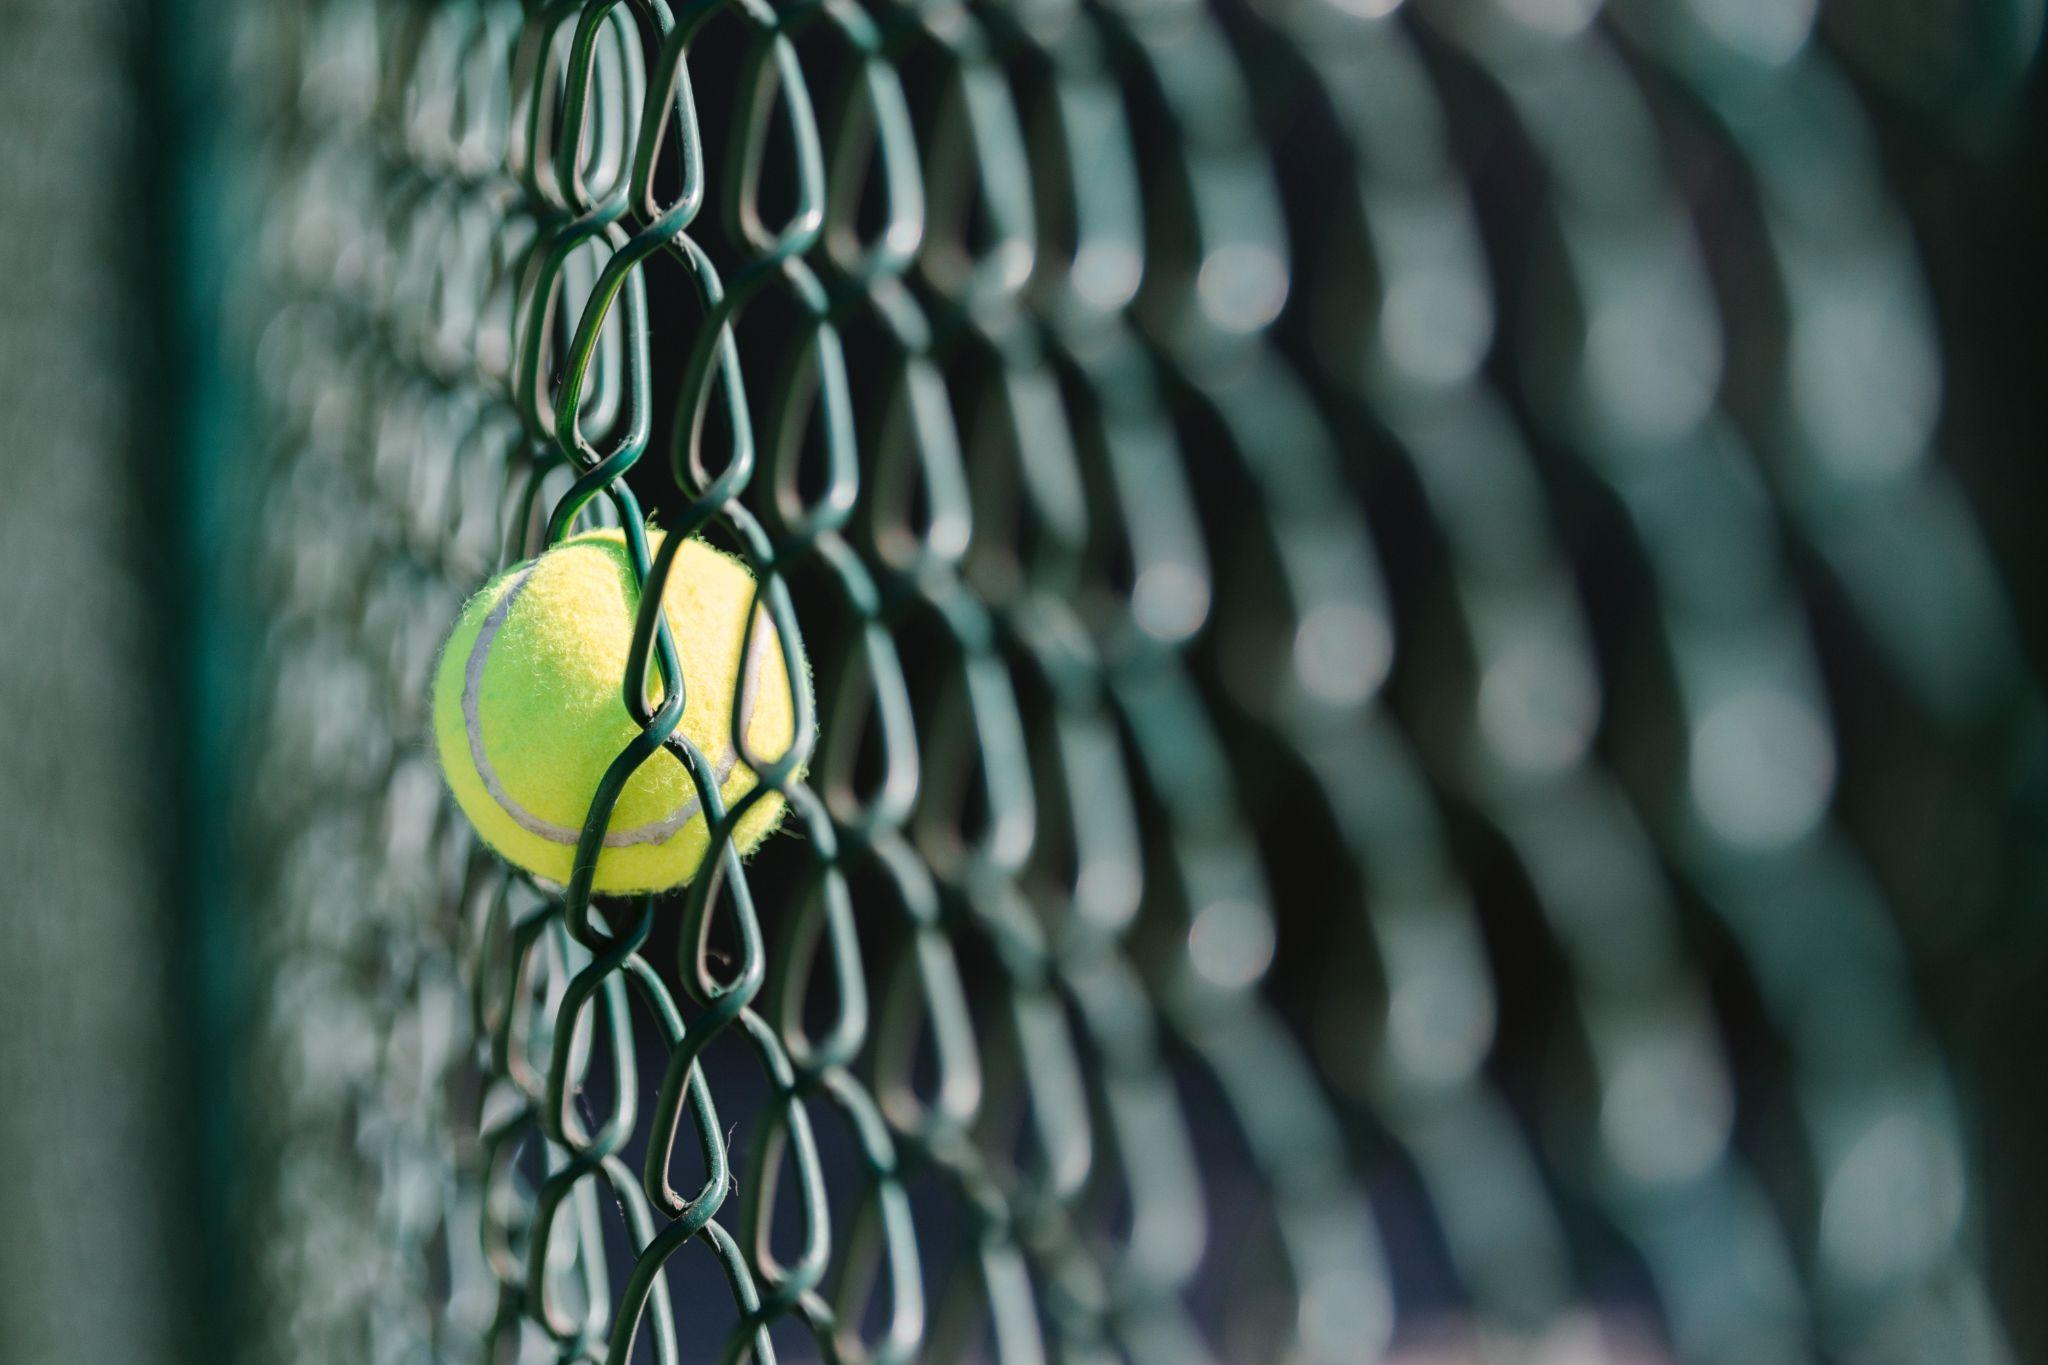 Tennis ball stuck in wire fences